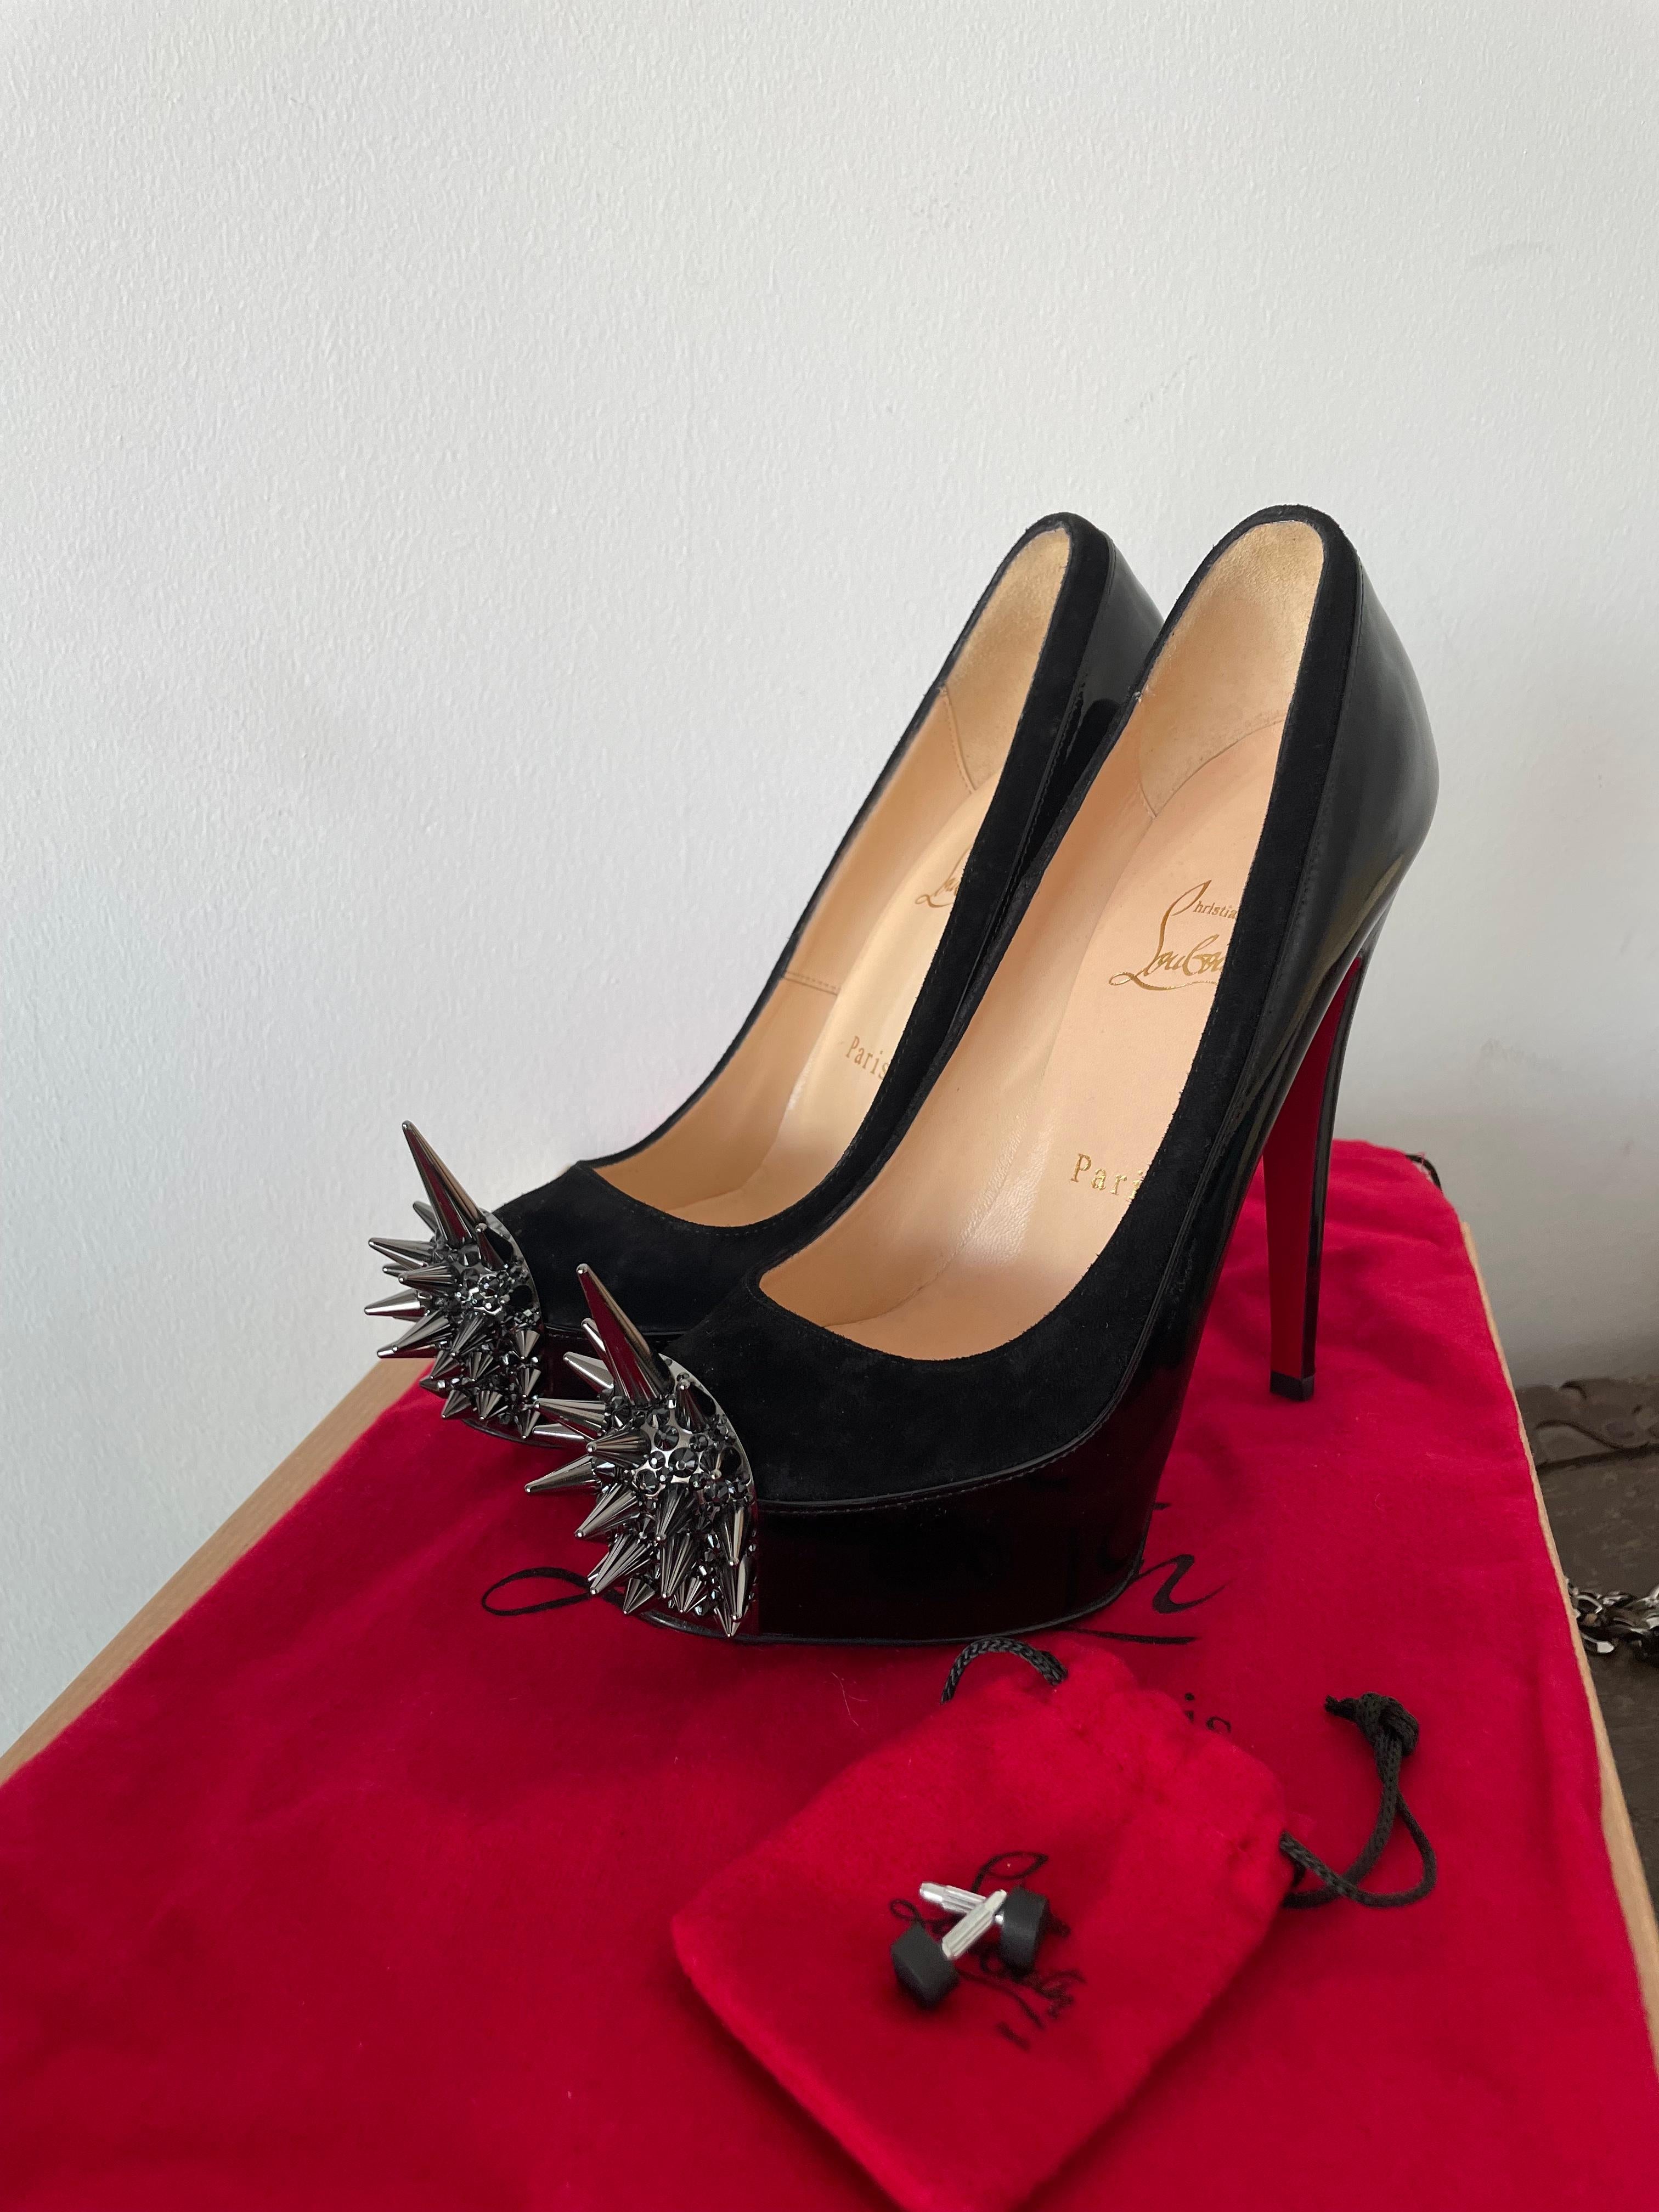 ntroducing the Christian Louboutin Asteroid 160 Spike in Black Suede and Patent Leather, a brand new and exceptional creation from the renowned luxury brand. Cette superbe chaussure est vraiment spéciale et vaut l'investissement en raison de son